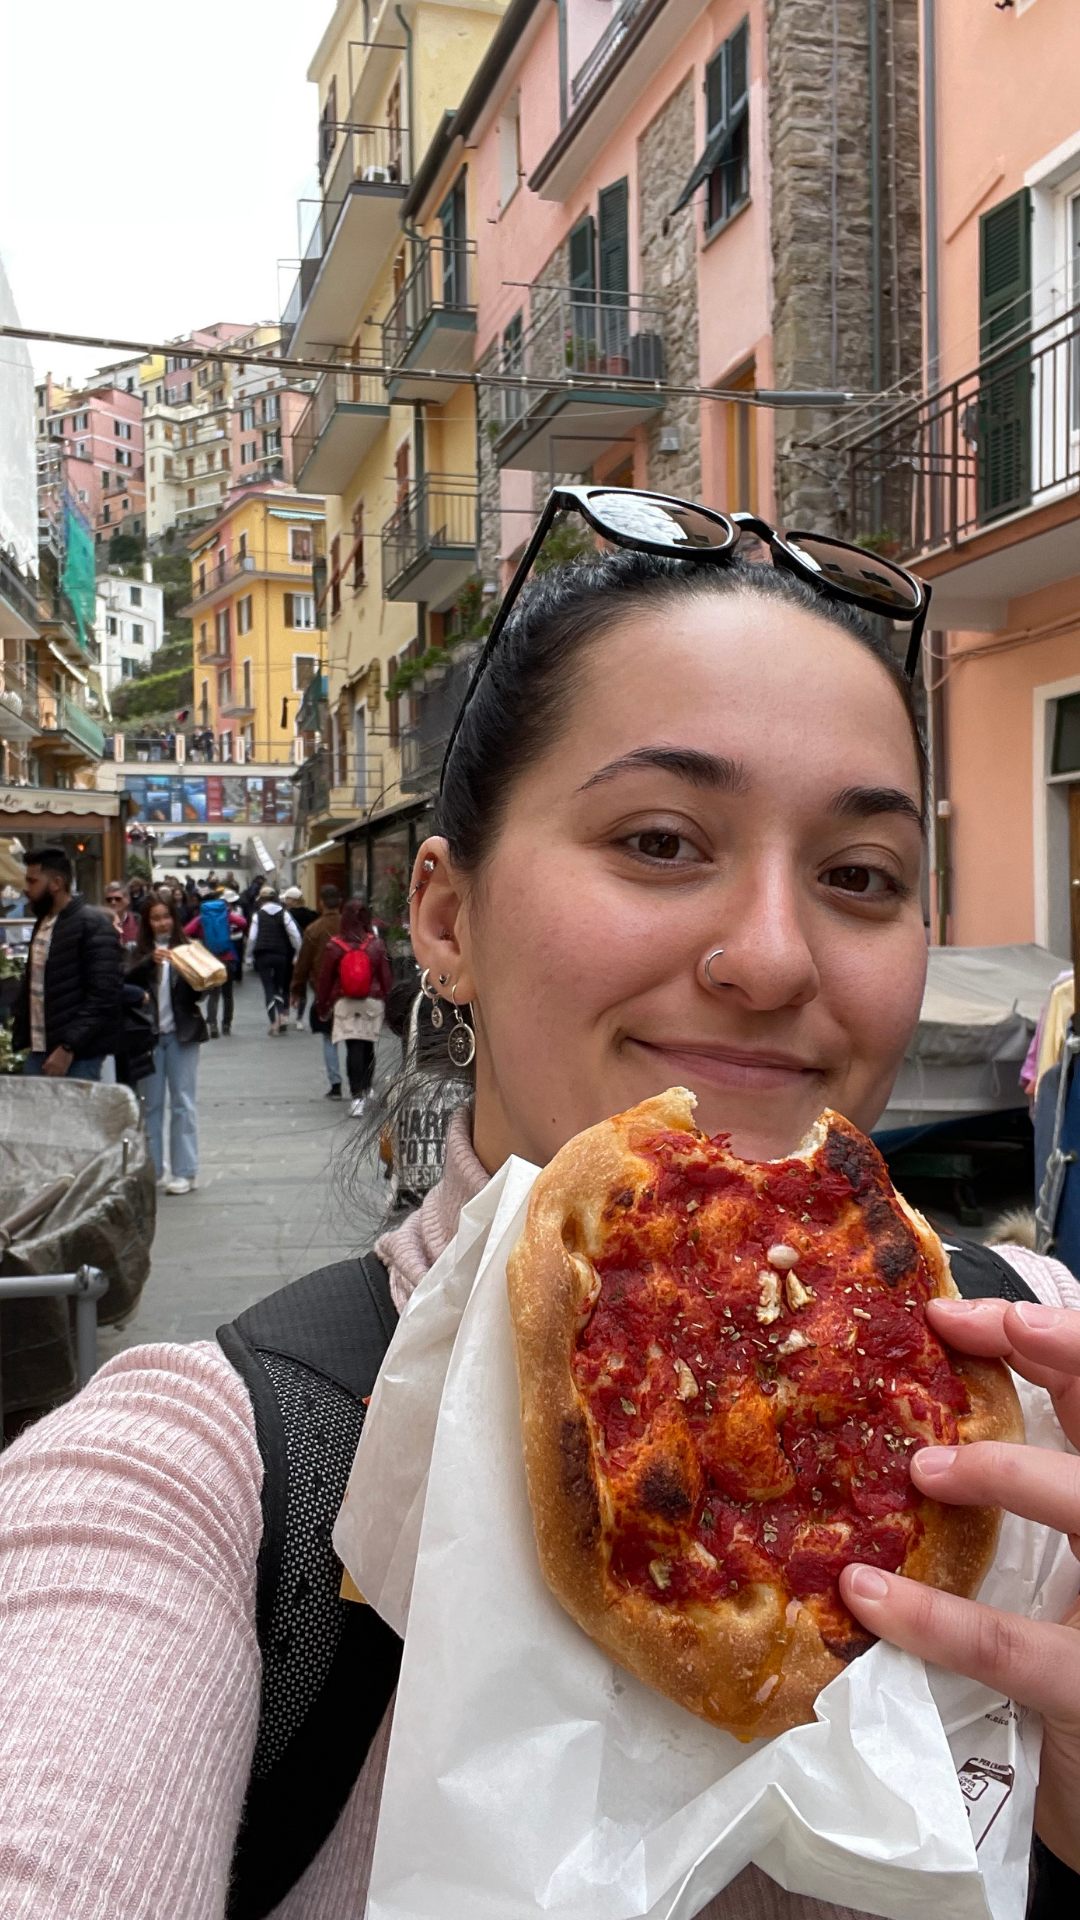 Amid the charming streets of Cinque Terre, a contented figure holds a mouthwatering panini, a true delight for the senses. The colorful architecture forms a vibrant backdrop as the person's satisfied expression mirrors the savory joy of their meal. A perfect moment of culinary indulgence against the picturesque backdrop of this Italian coastal gem.